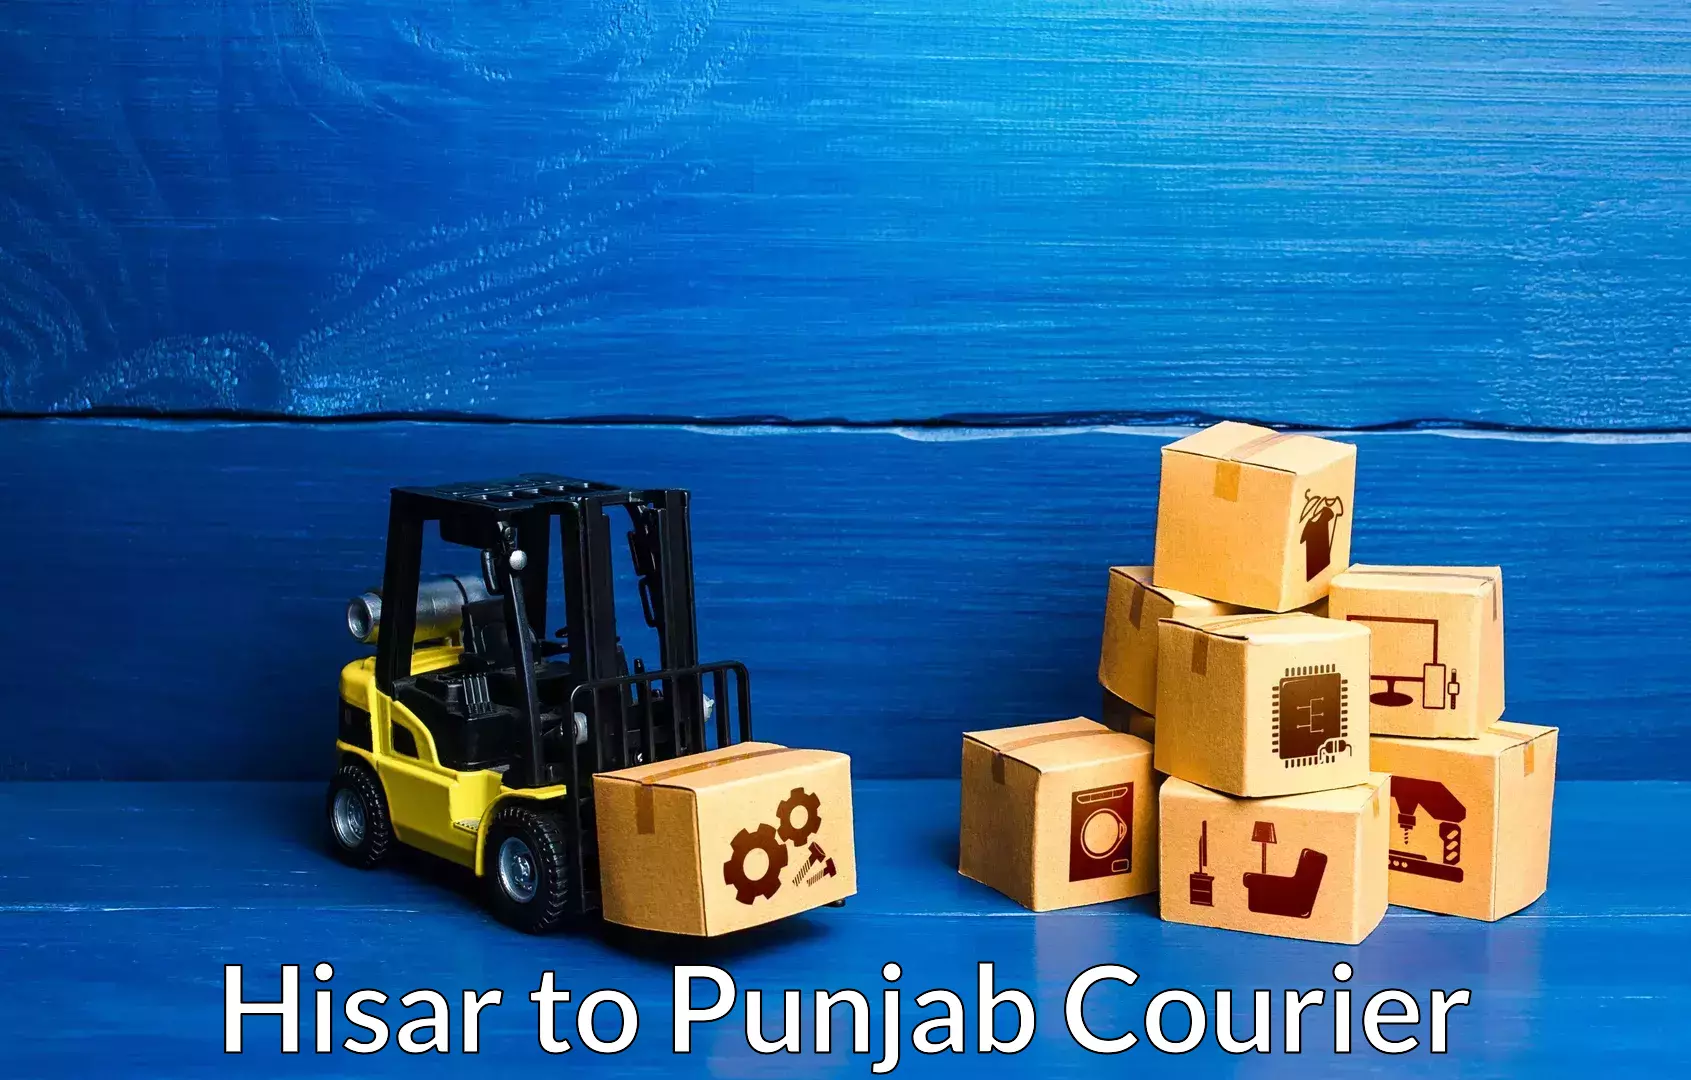 Full-service movers Hisar to Punjab